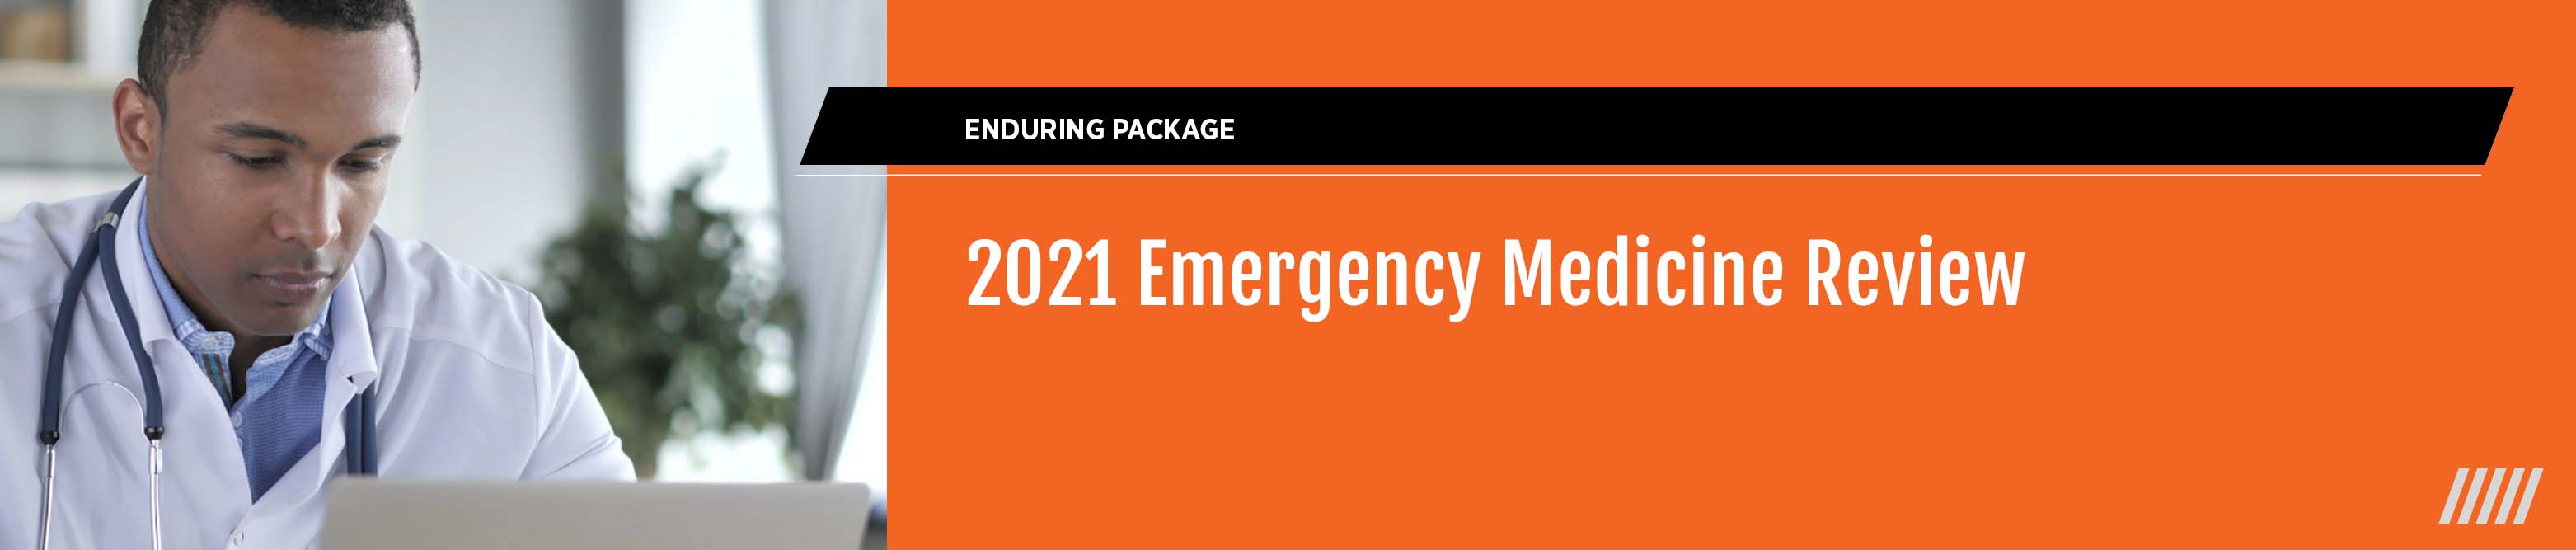 2021 Emergency Medicine Review - Enduring Package Banner